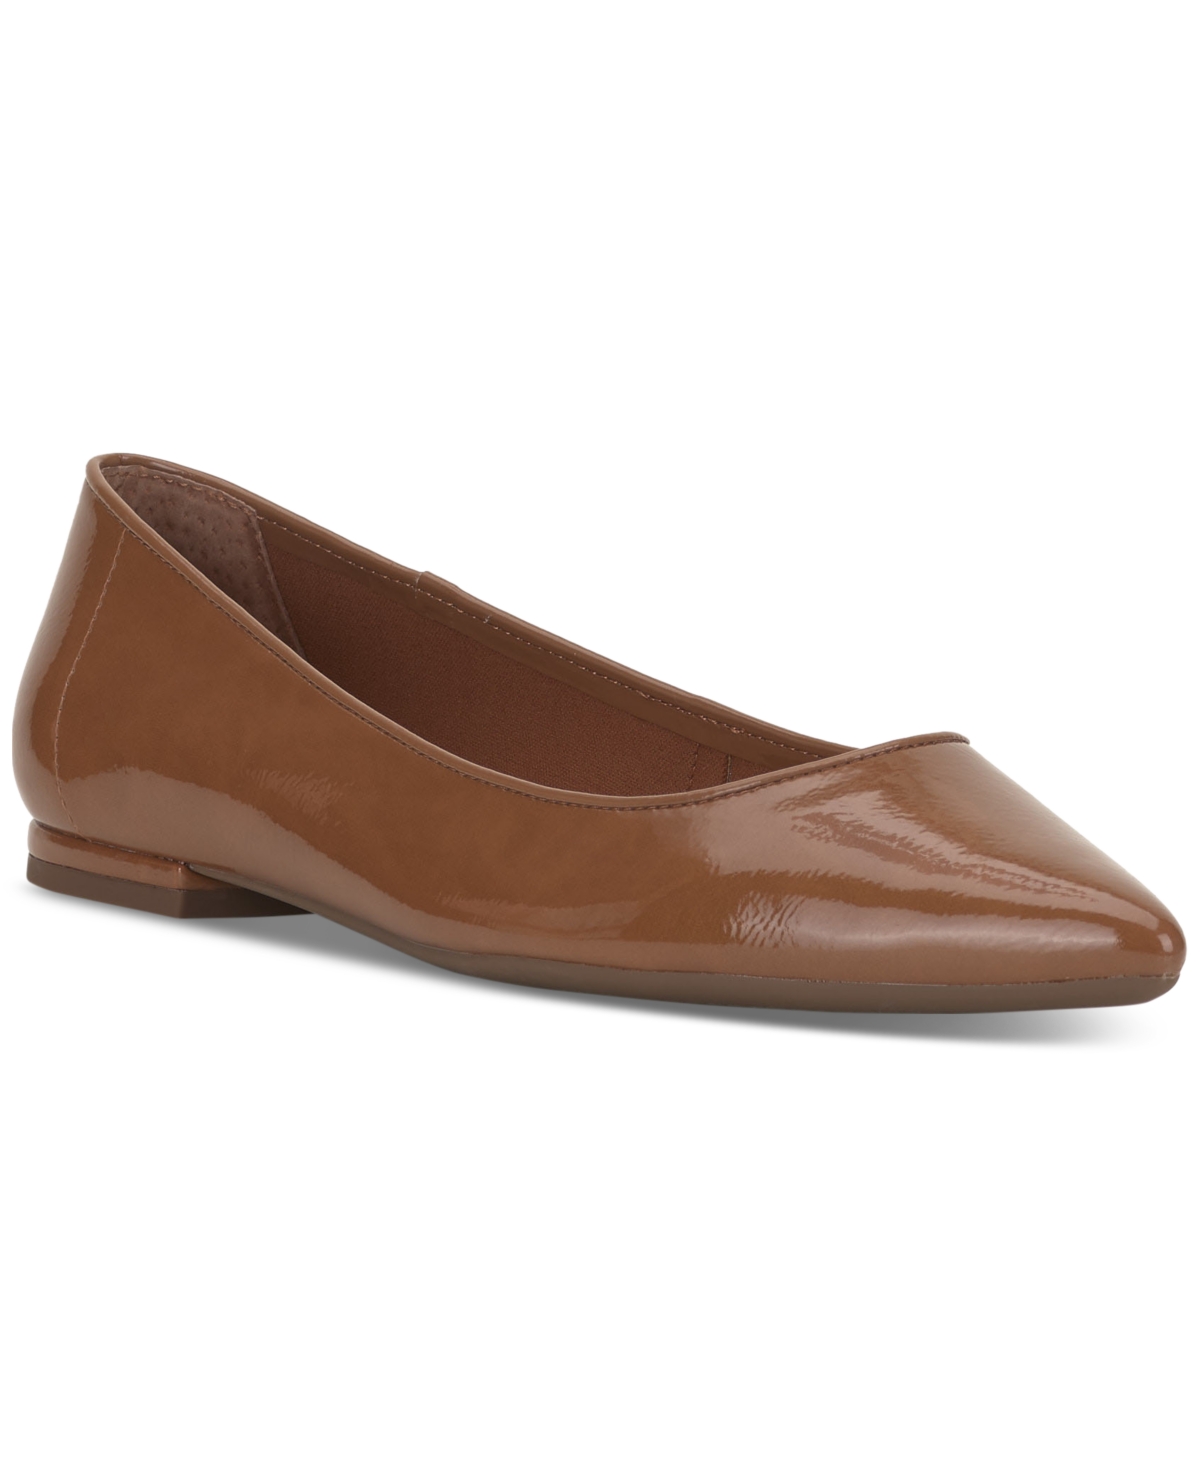 Women's Cazzedy Pointed-Toe Slip-On Flats - Malbec Faux Leather